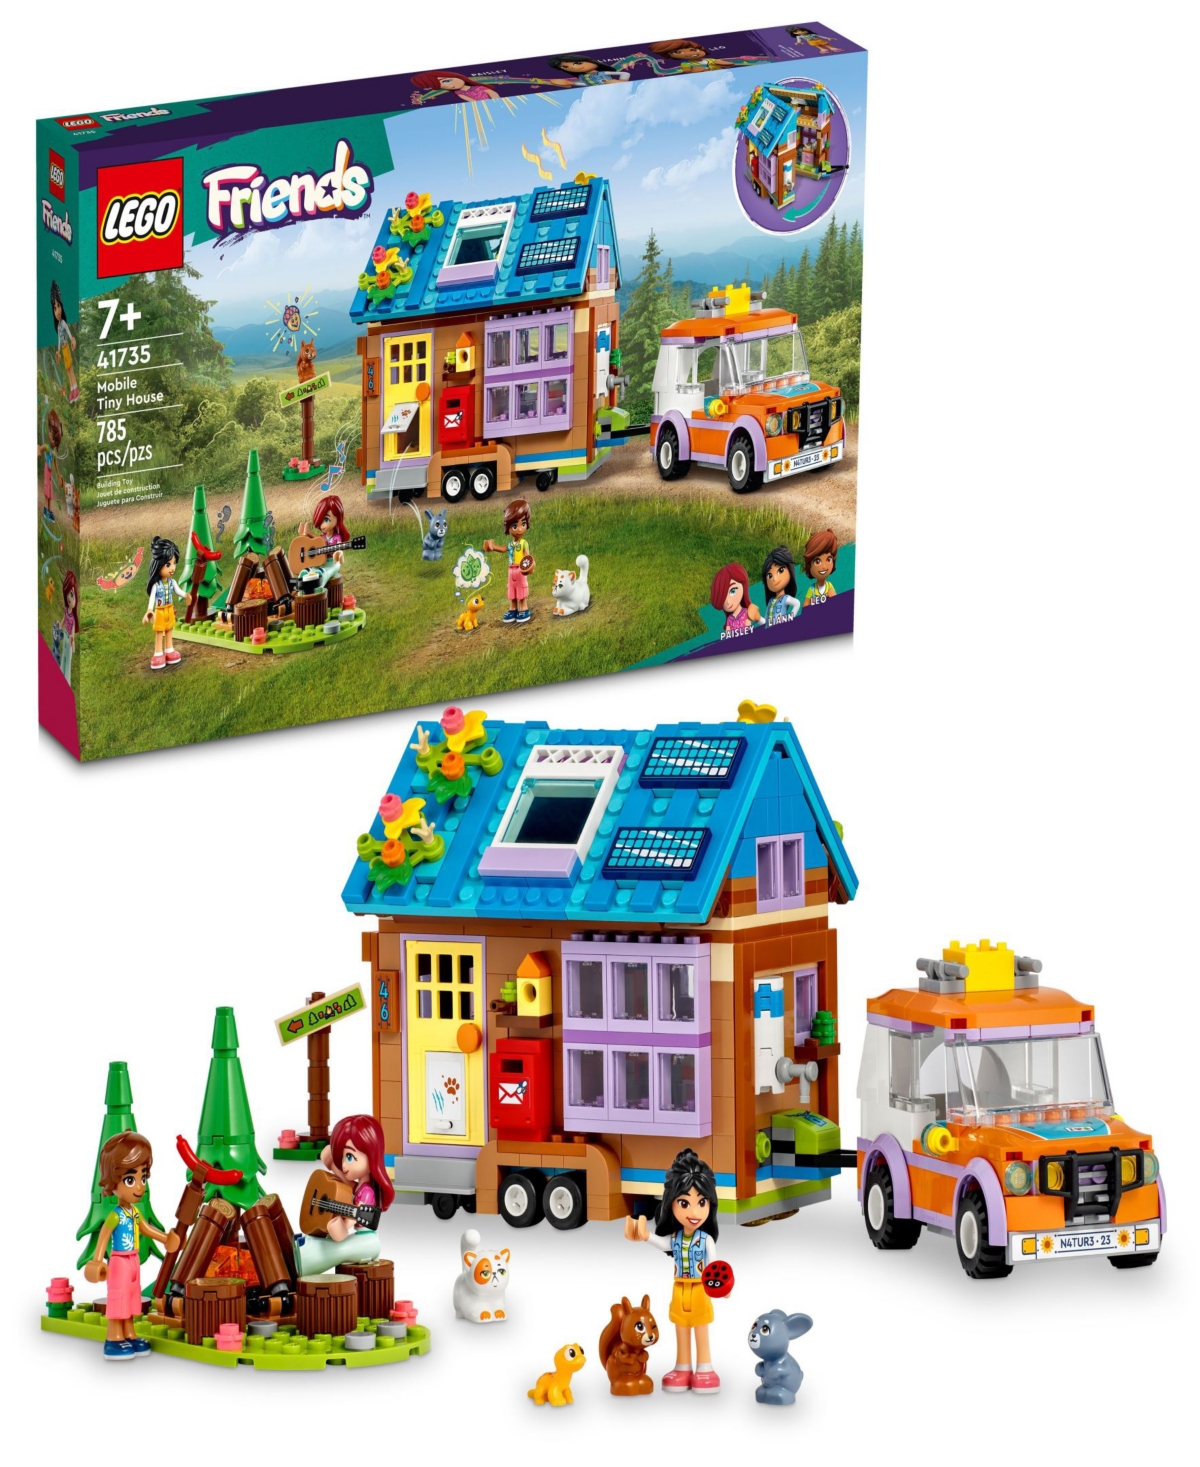 Lego Kids' Friends Mobile Tiny House 41735 Building Toy Set With Leo, Liann, Paisley And Pets Figures In Multicolor